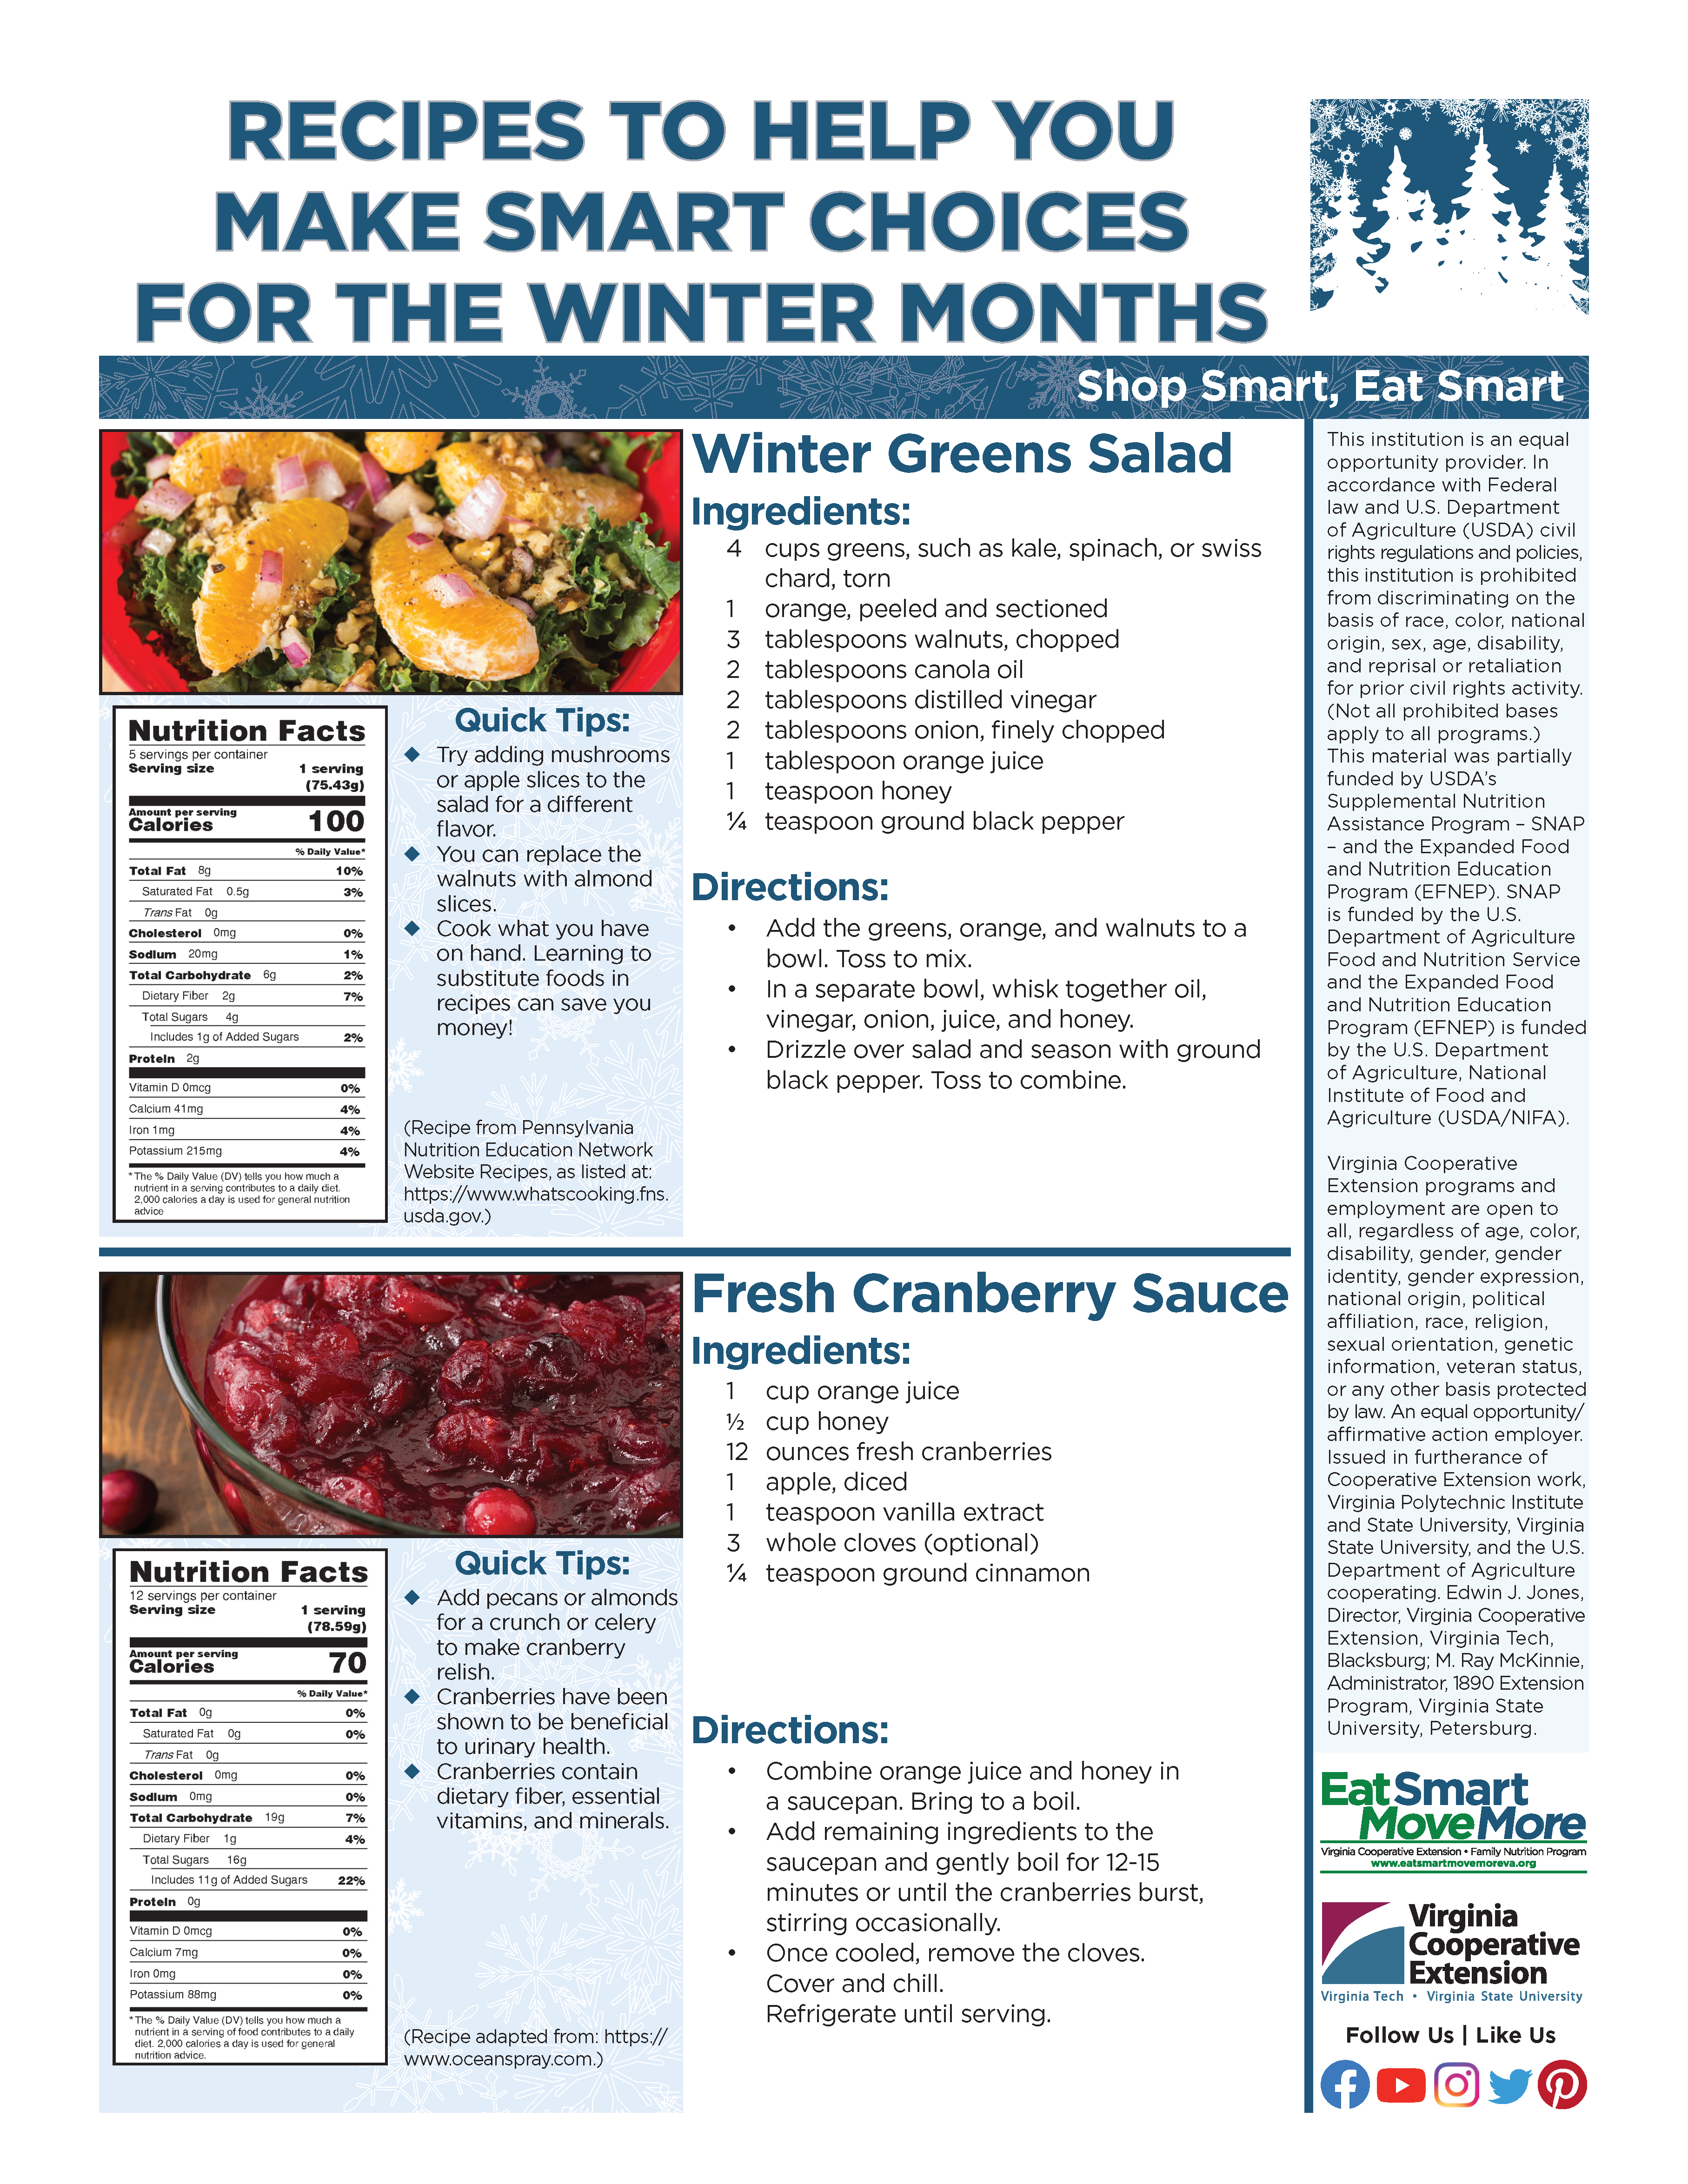 Graphic of holiday recipes: Winter Greens Salad and Fresh Cranberry Sauce.